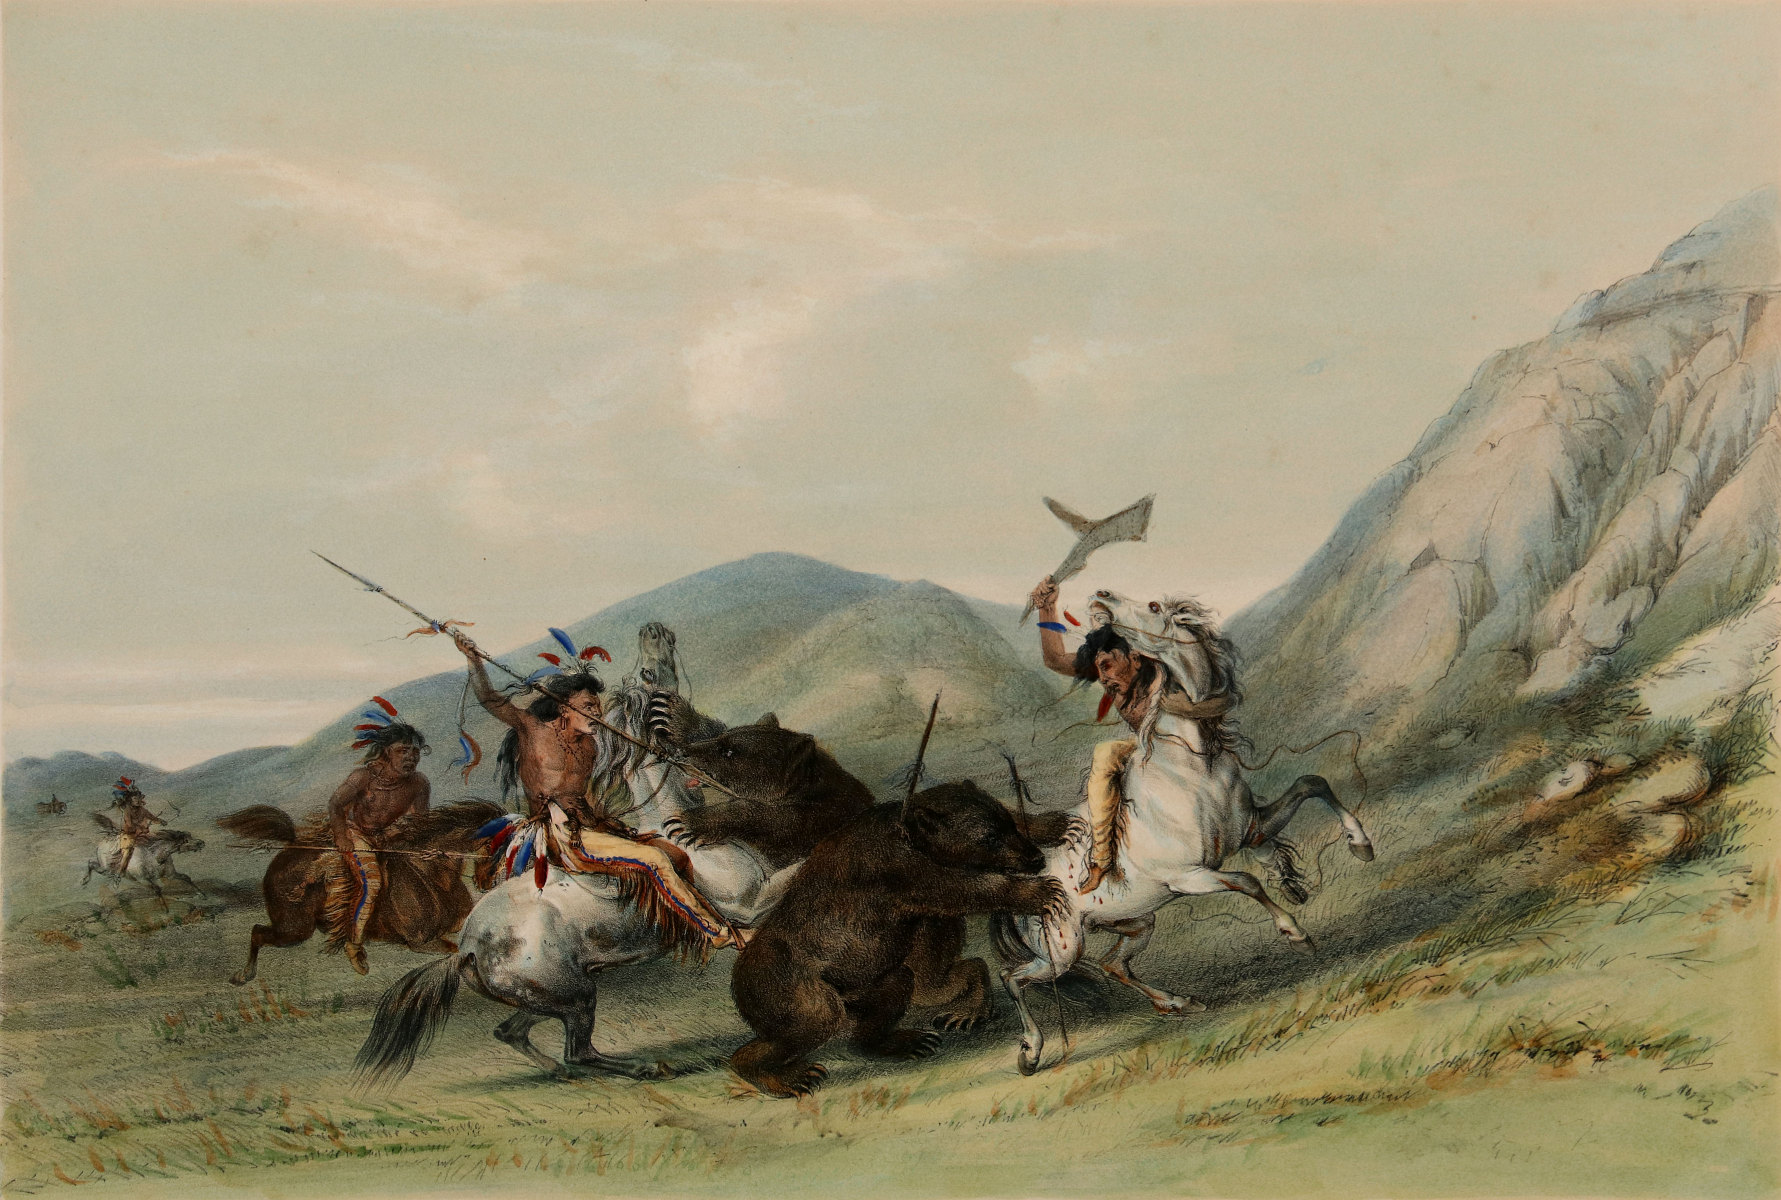 AFTER GEORGE CATLIN, ATTACKING THE GRIZZLY BEAR